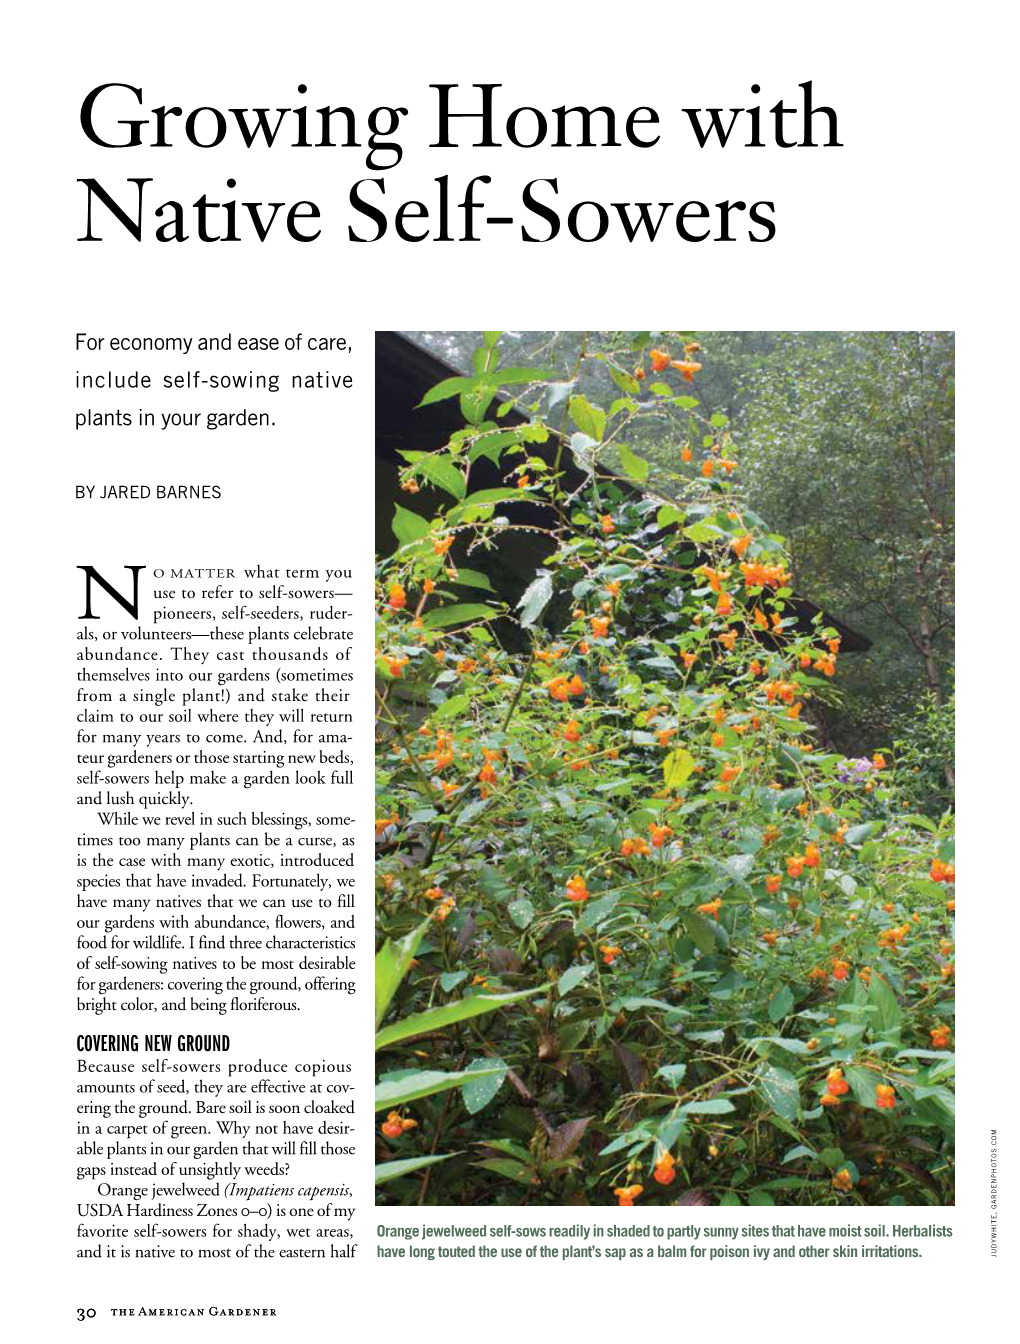 Self-Sowing Natives by Jared Barnes